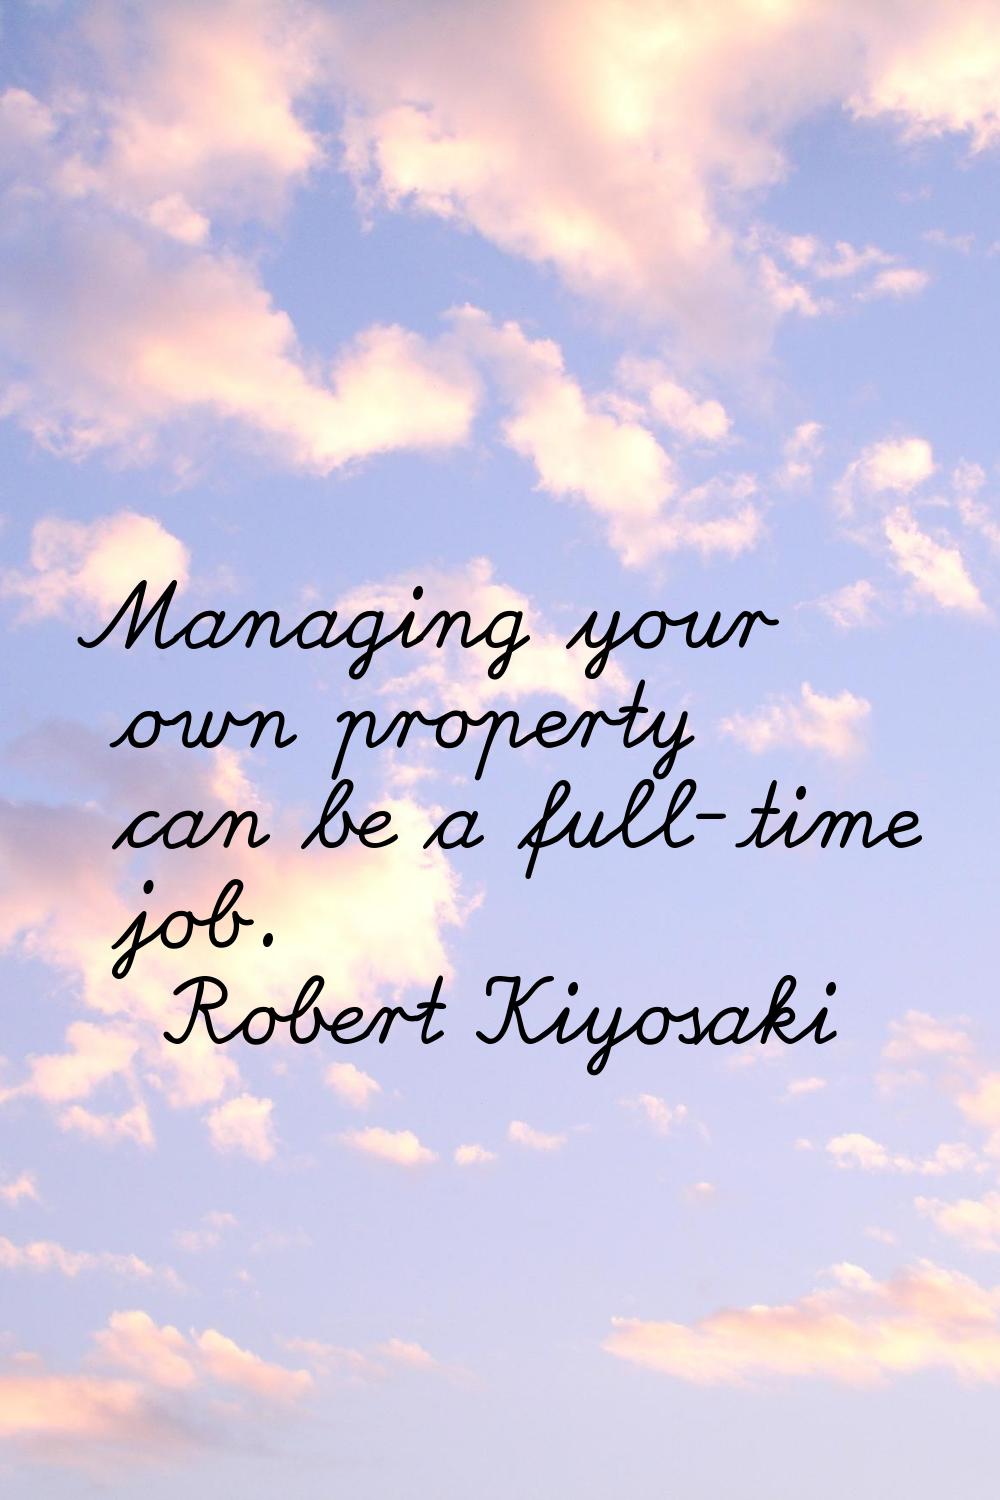 Managing your own property can be a full-time job.